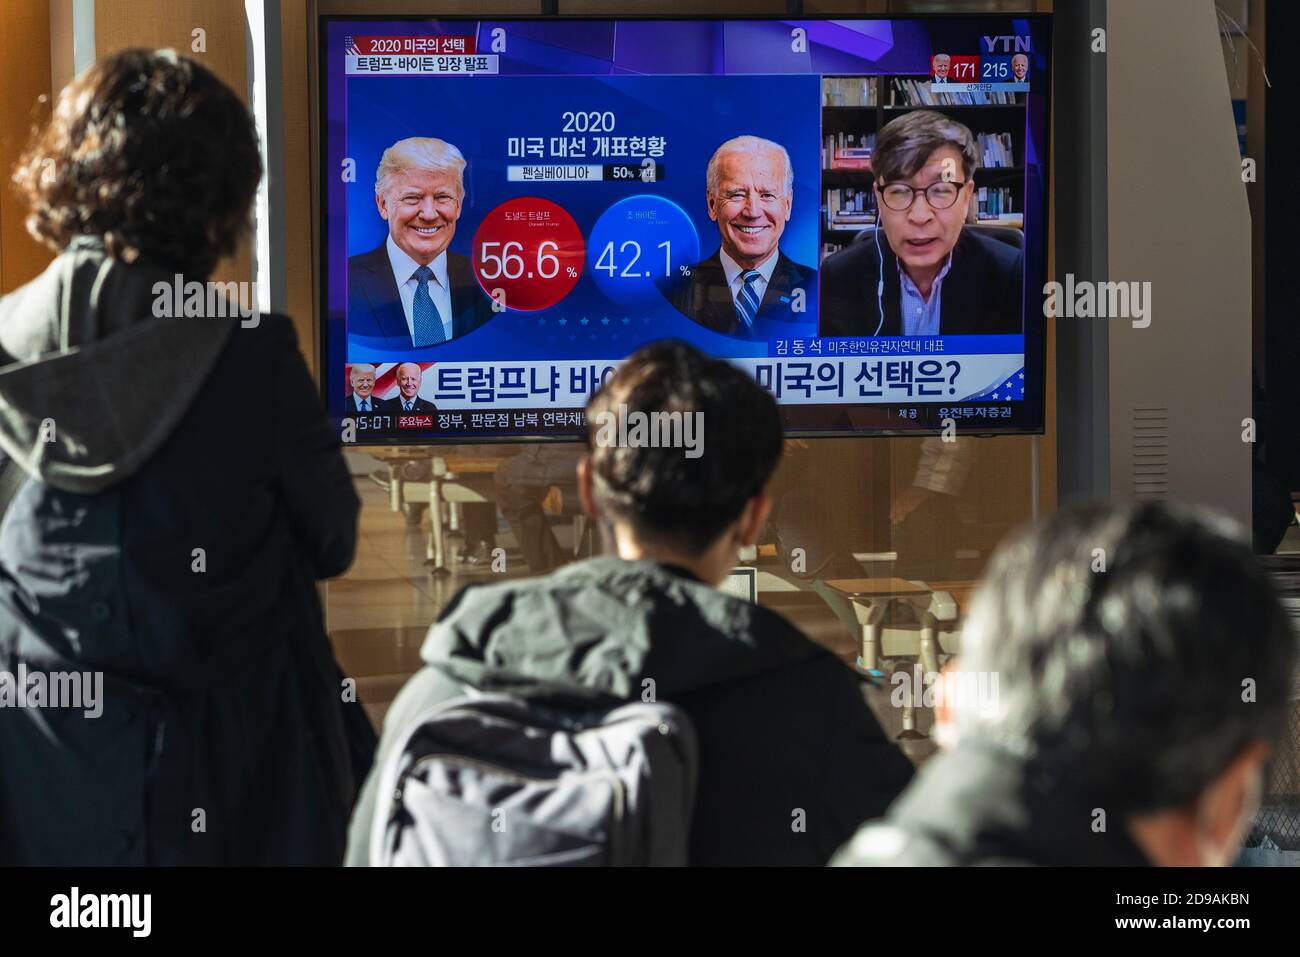 People at Seoul Train Station watch TV news report about the US Presidential election comparing Joe Biden with Donald Trump on 2020 US presidential election day. Stock Photo